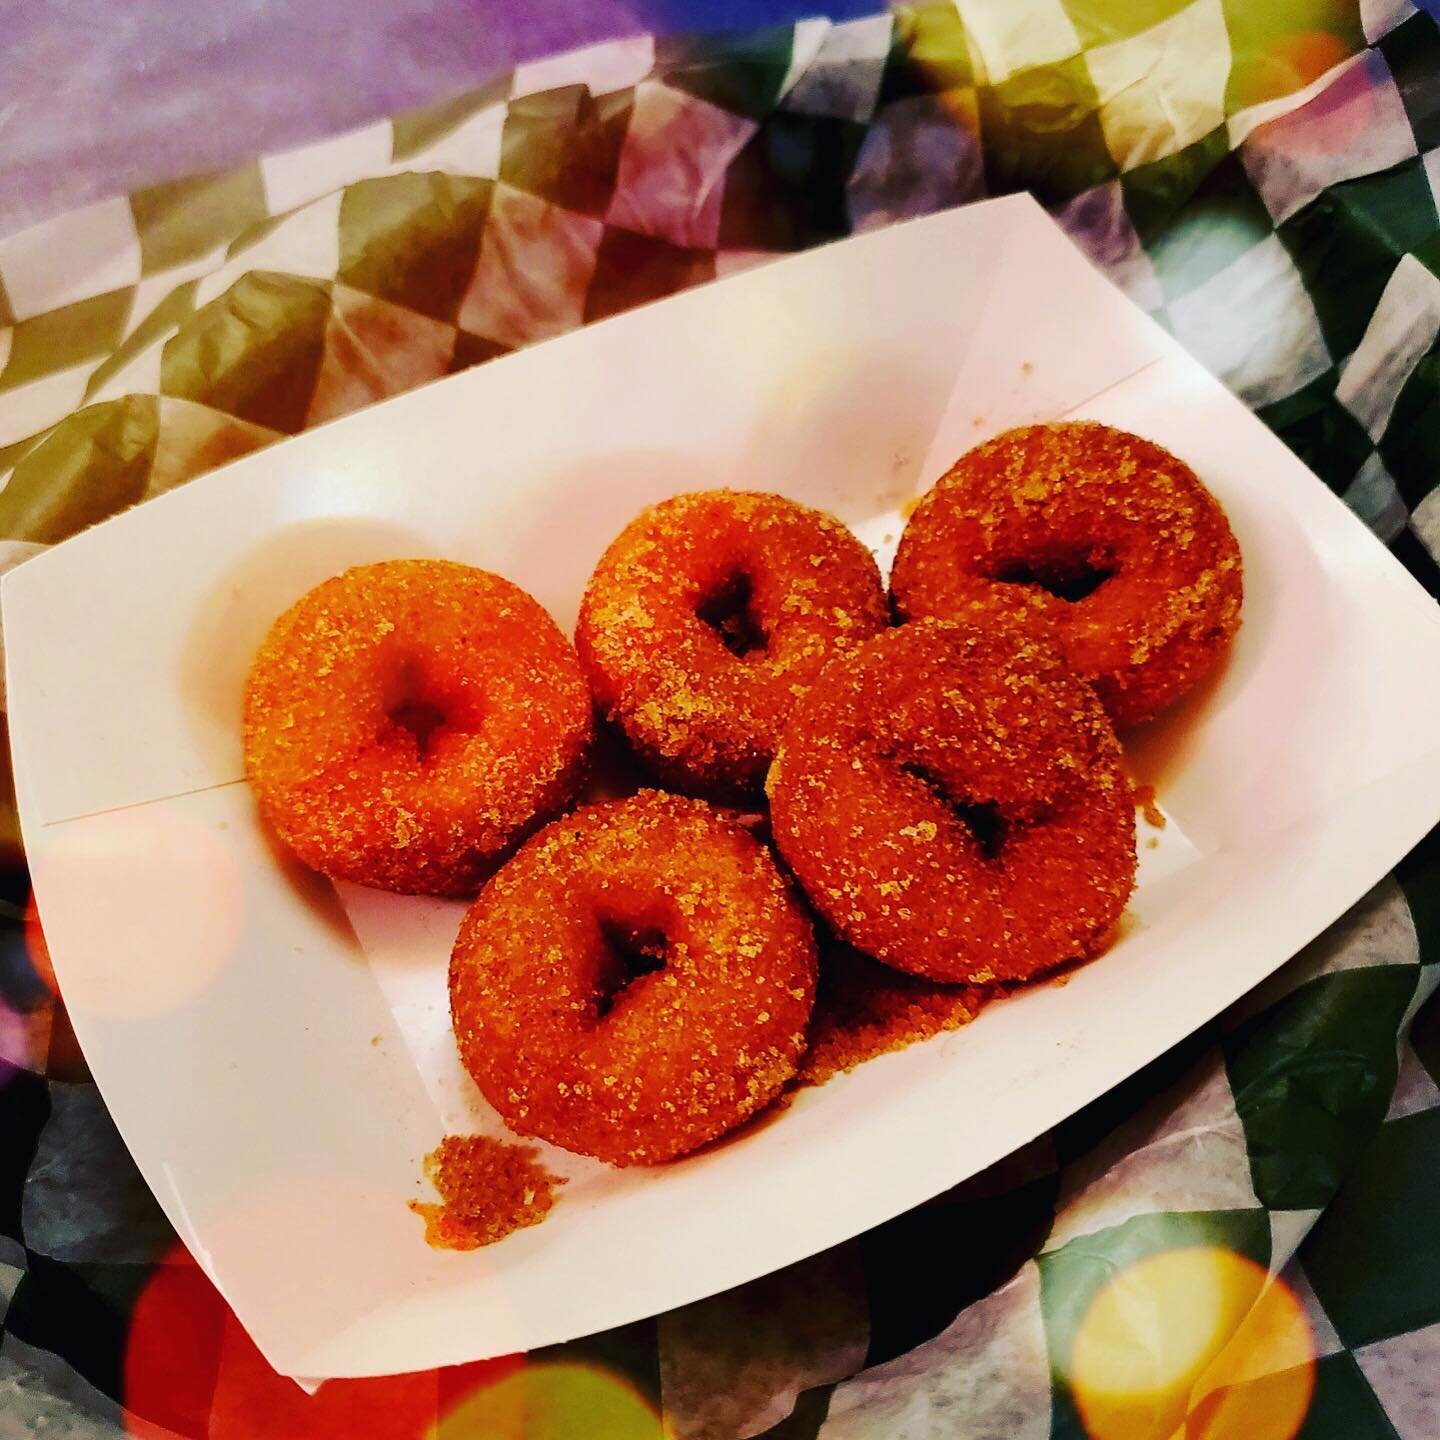 Next week&rsquo;s State Fair themed app: Mini Donuts! Also, T-minus 12 1/2 days left to get your Bart Simpson burger!! (Aka mini Homer Simpson&rsquo;s!)